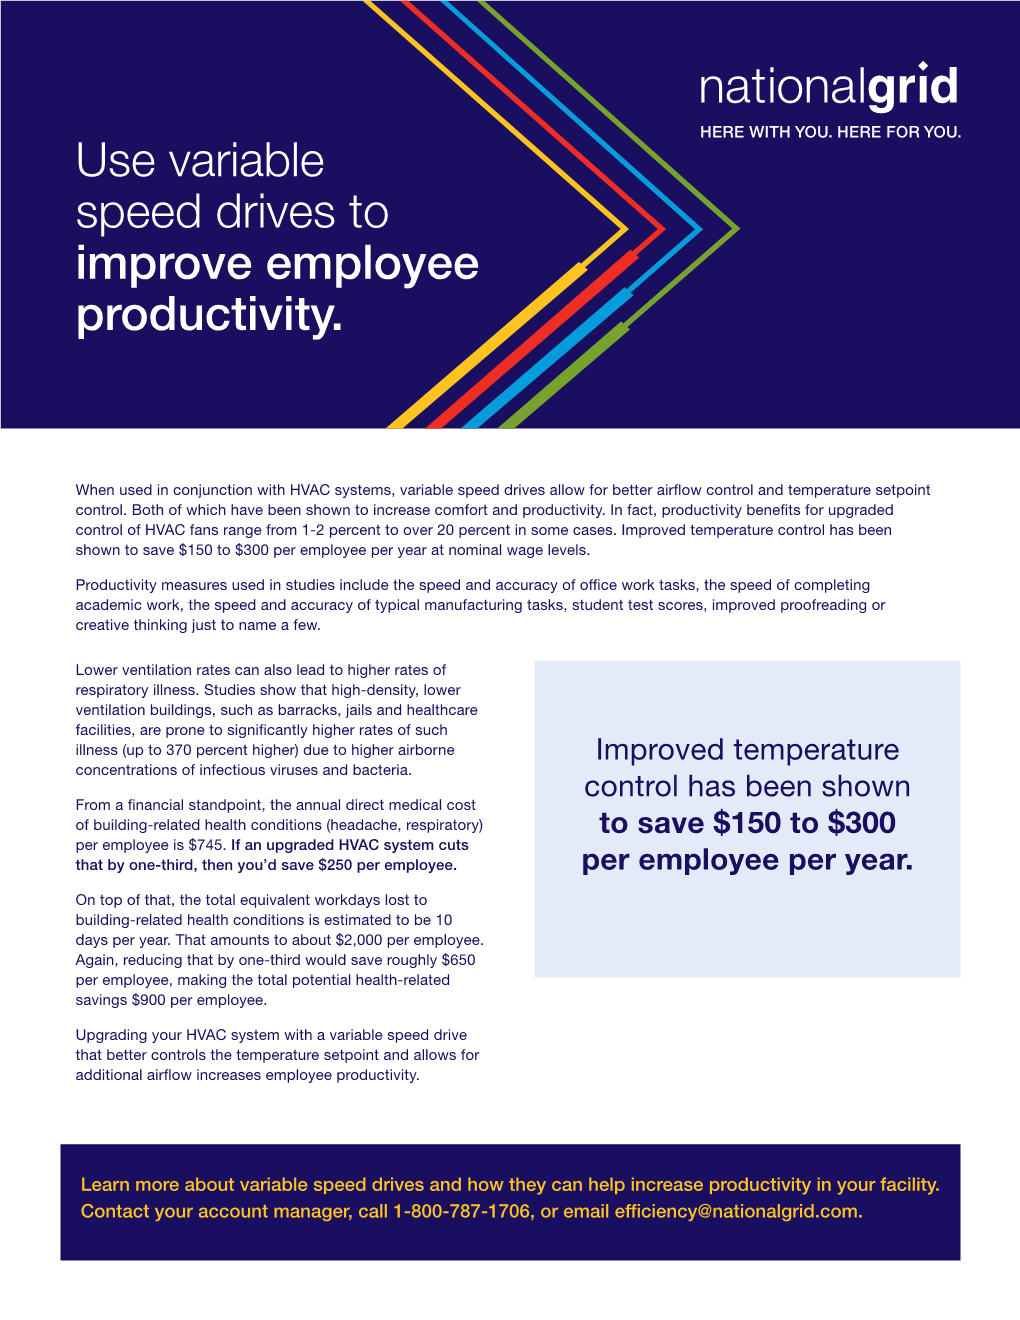 Variable Speed Drives to Improve Employee Productivity